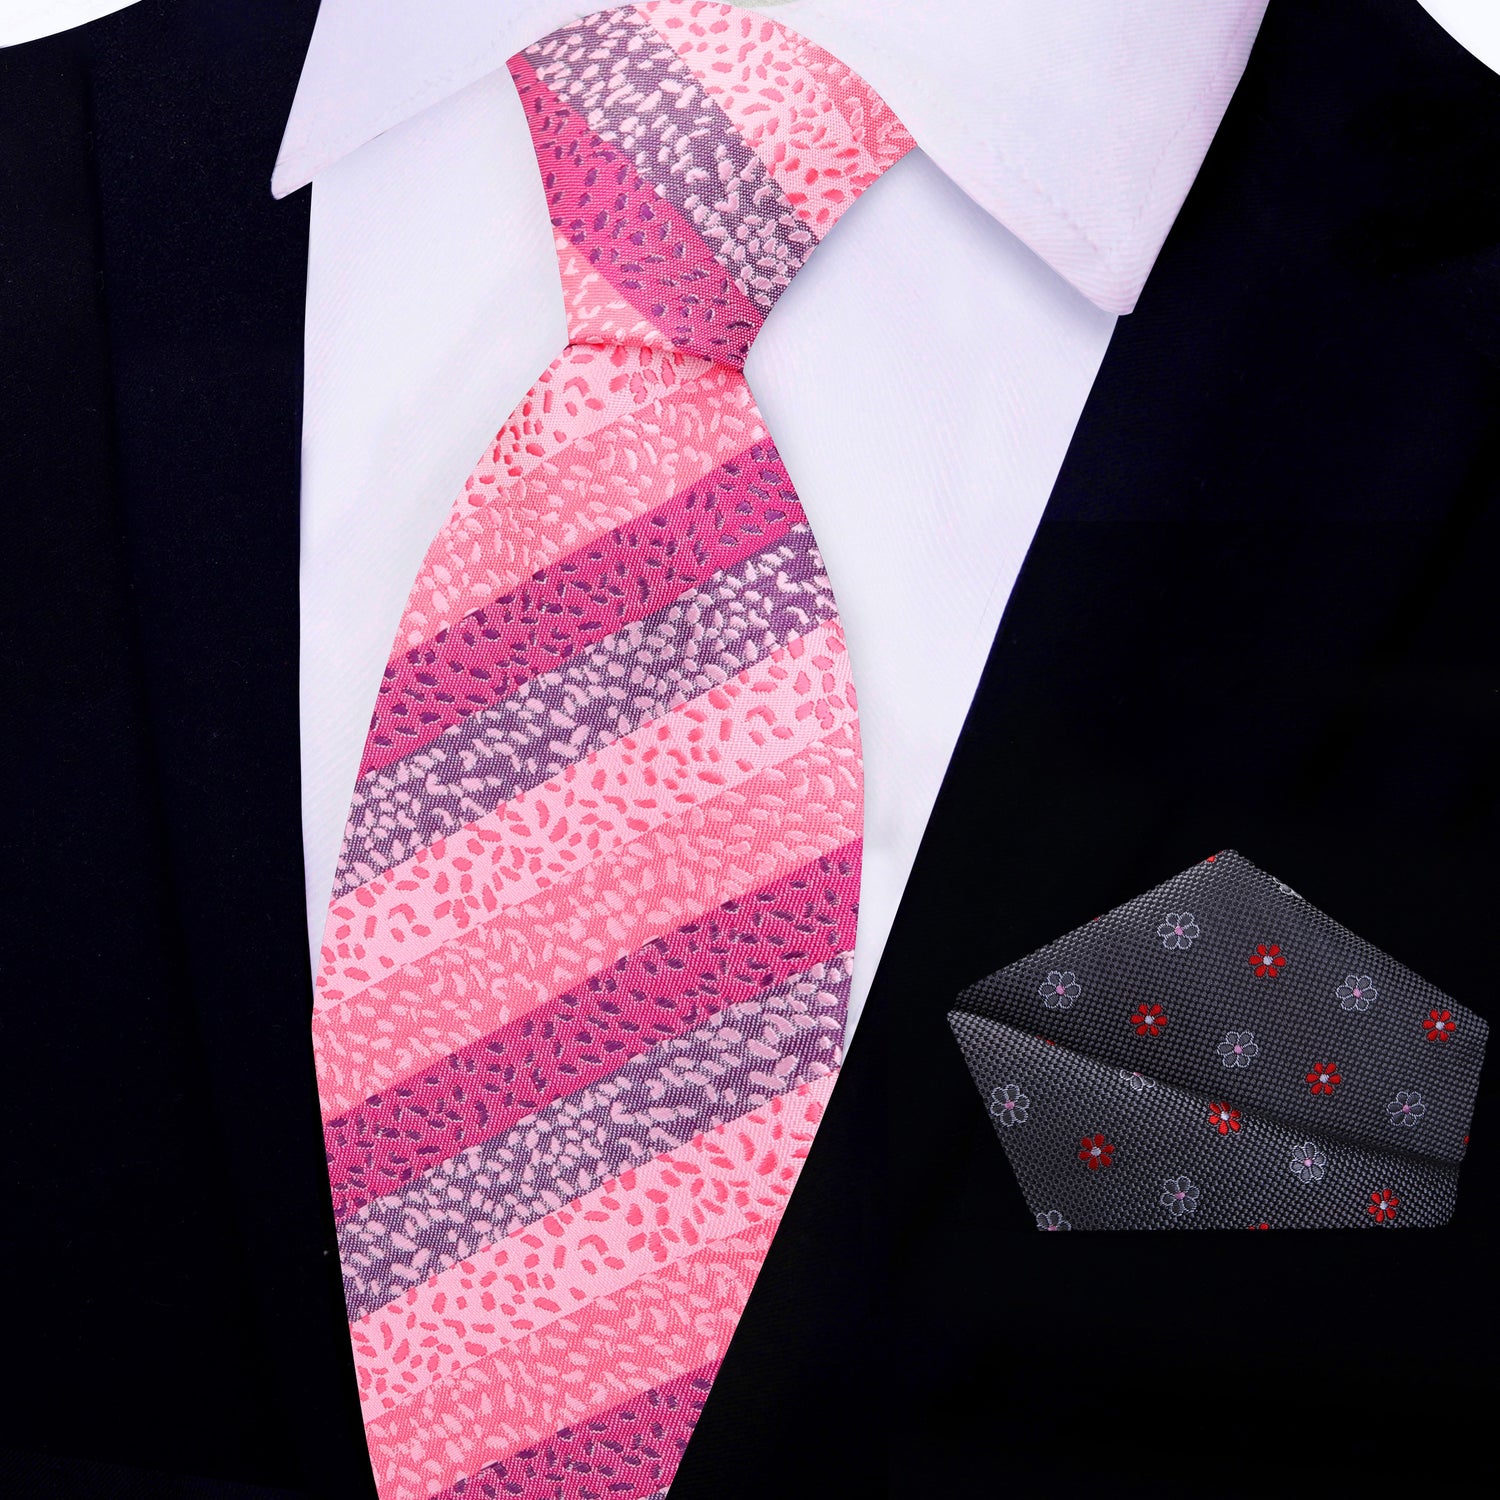 View 2: Shades of Pink with stripes and texture silk tie and accenting grey and pink floral pocket square